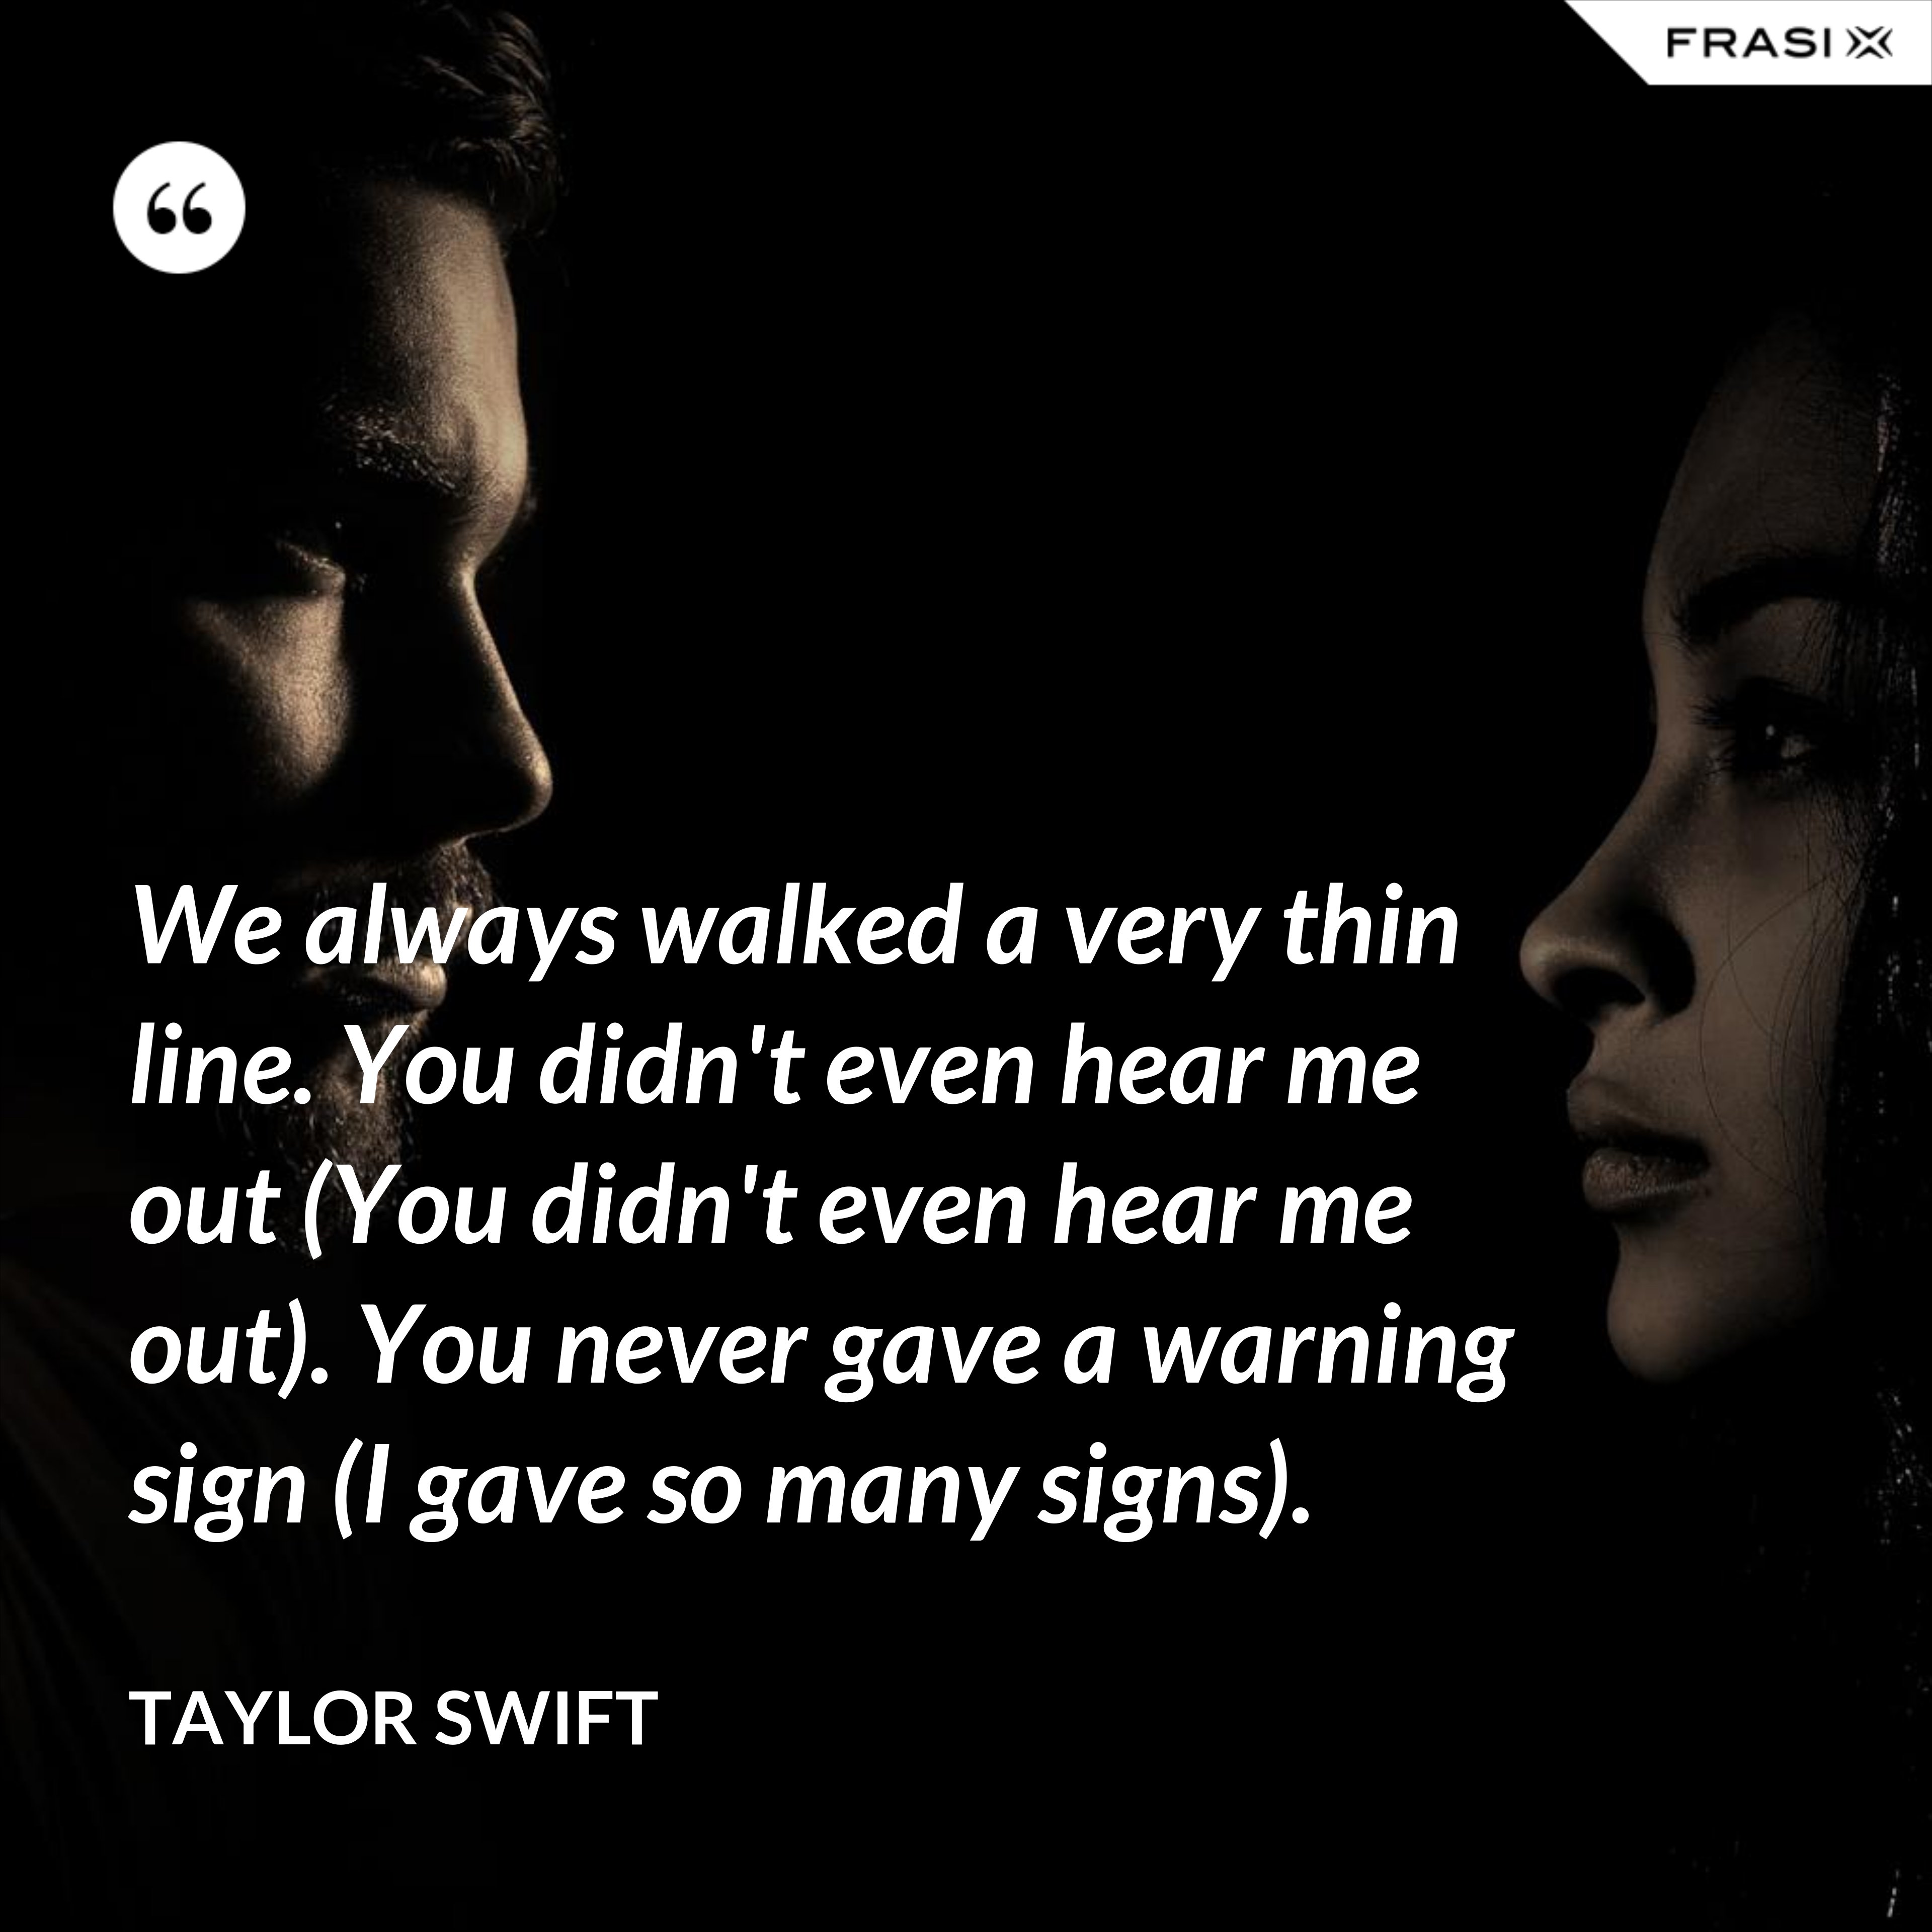 We always walked a very thin line. You didn't even hear me out (You didn't even hear me out). You never gave a warning sign (I gave so many signs). - Taylor Swift